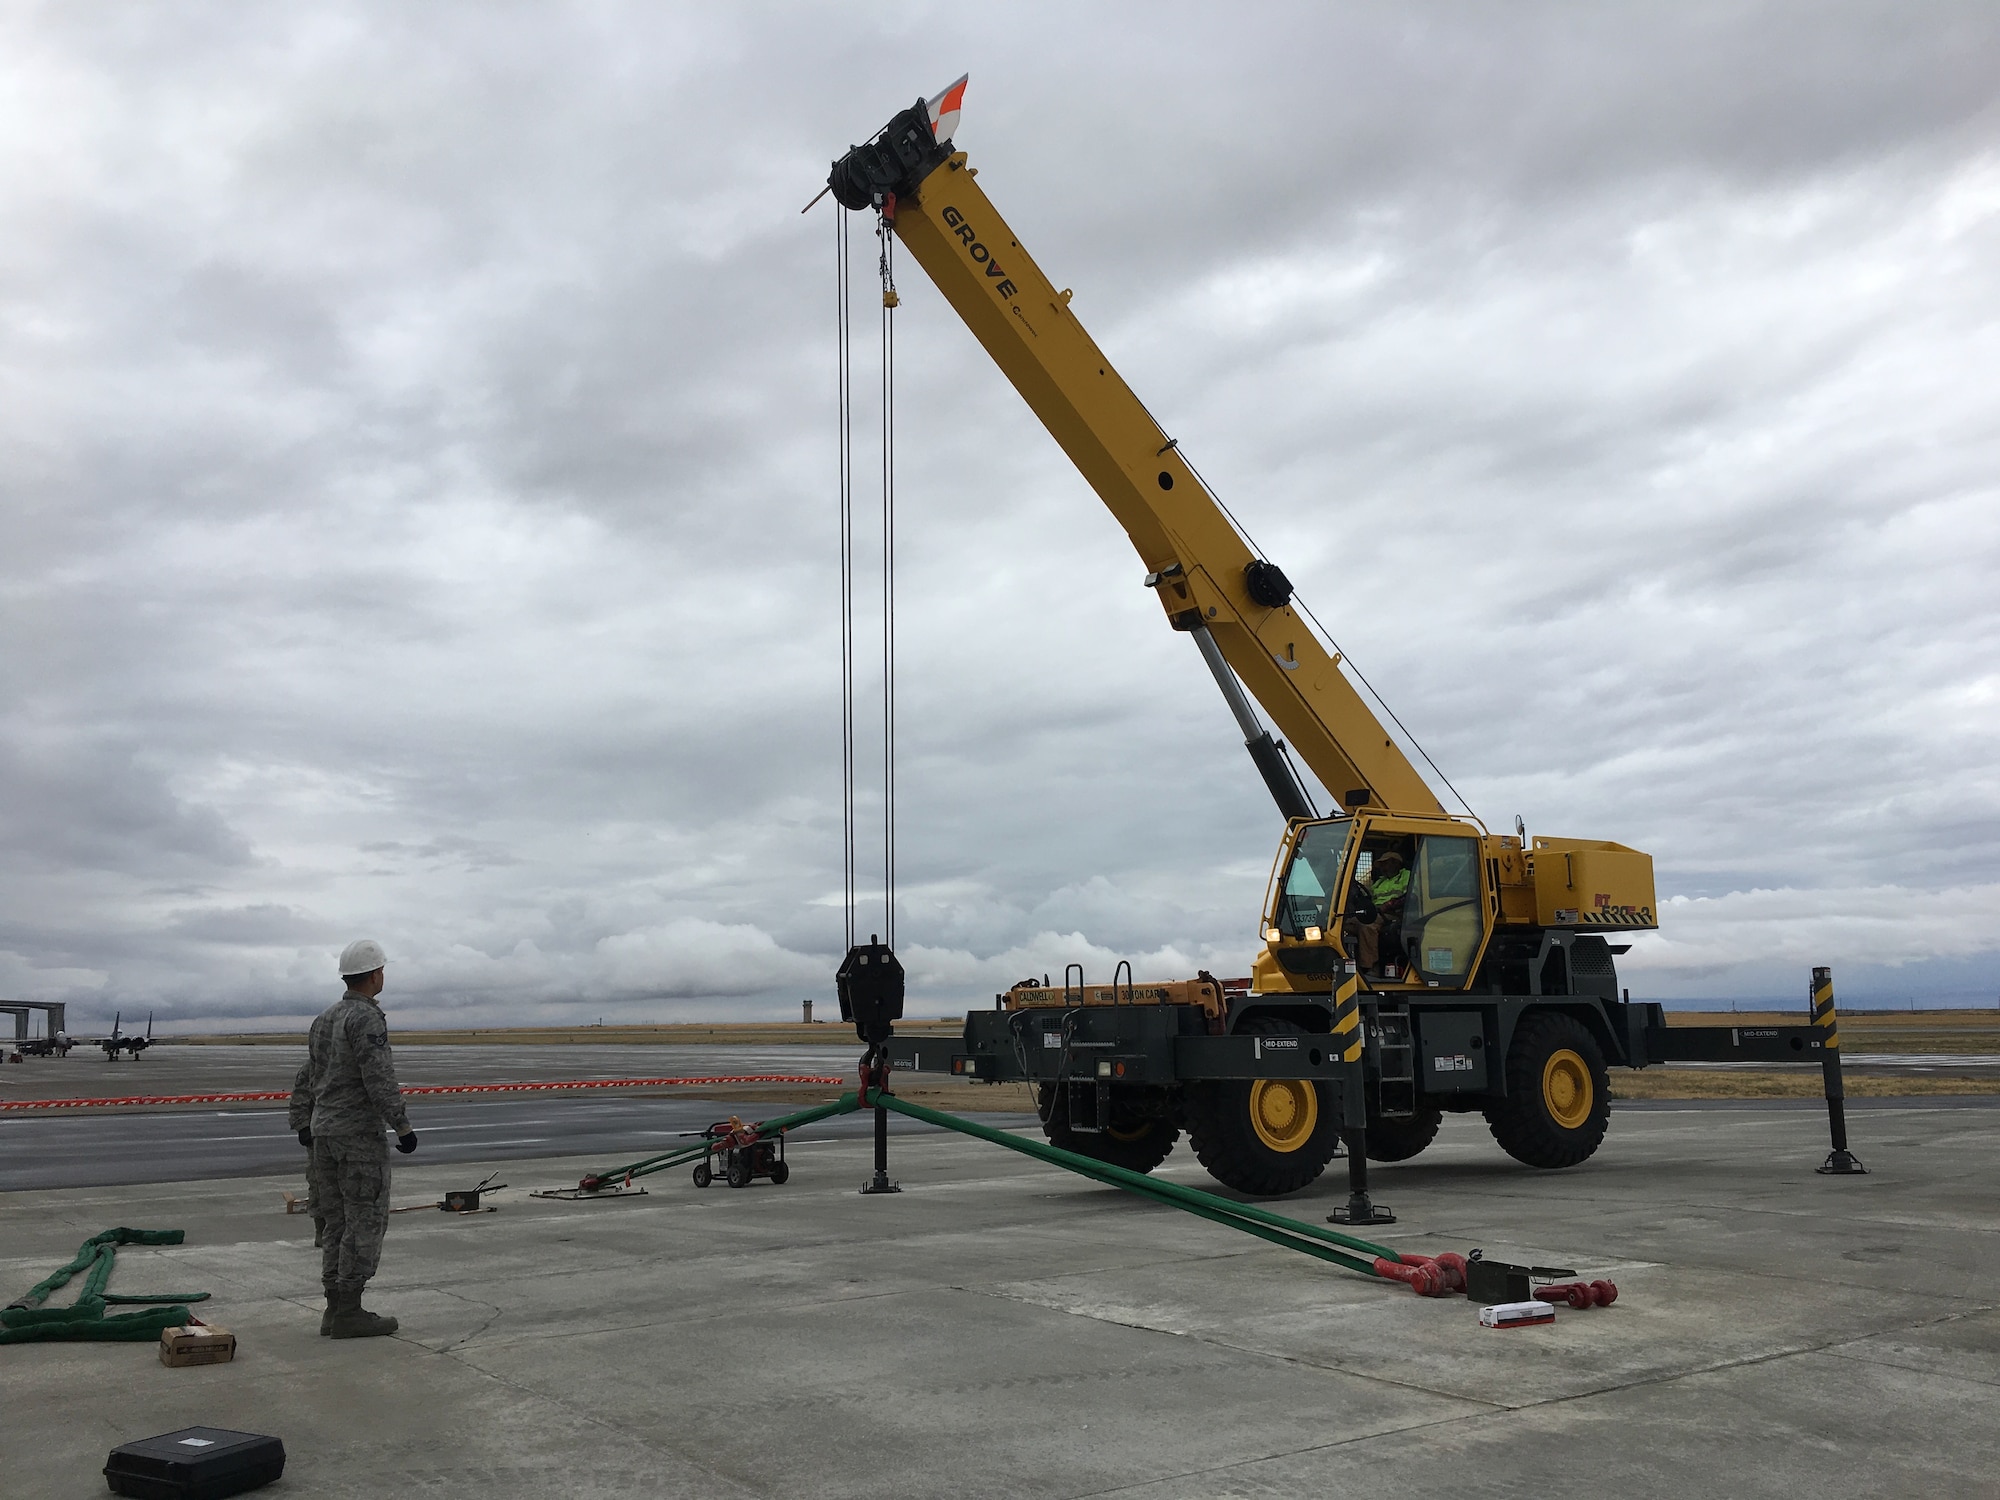 A member of the Airfield Pavement Evaluation Center conducts an anchor test on the airfield of Mountain Home Air Force Base, Idaho.